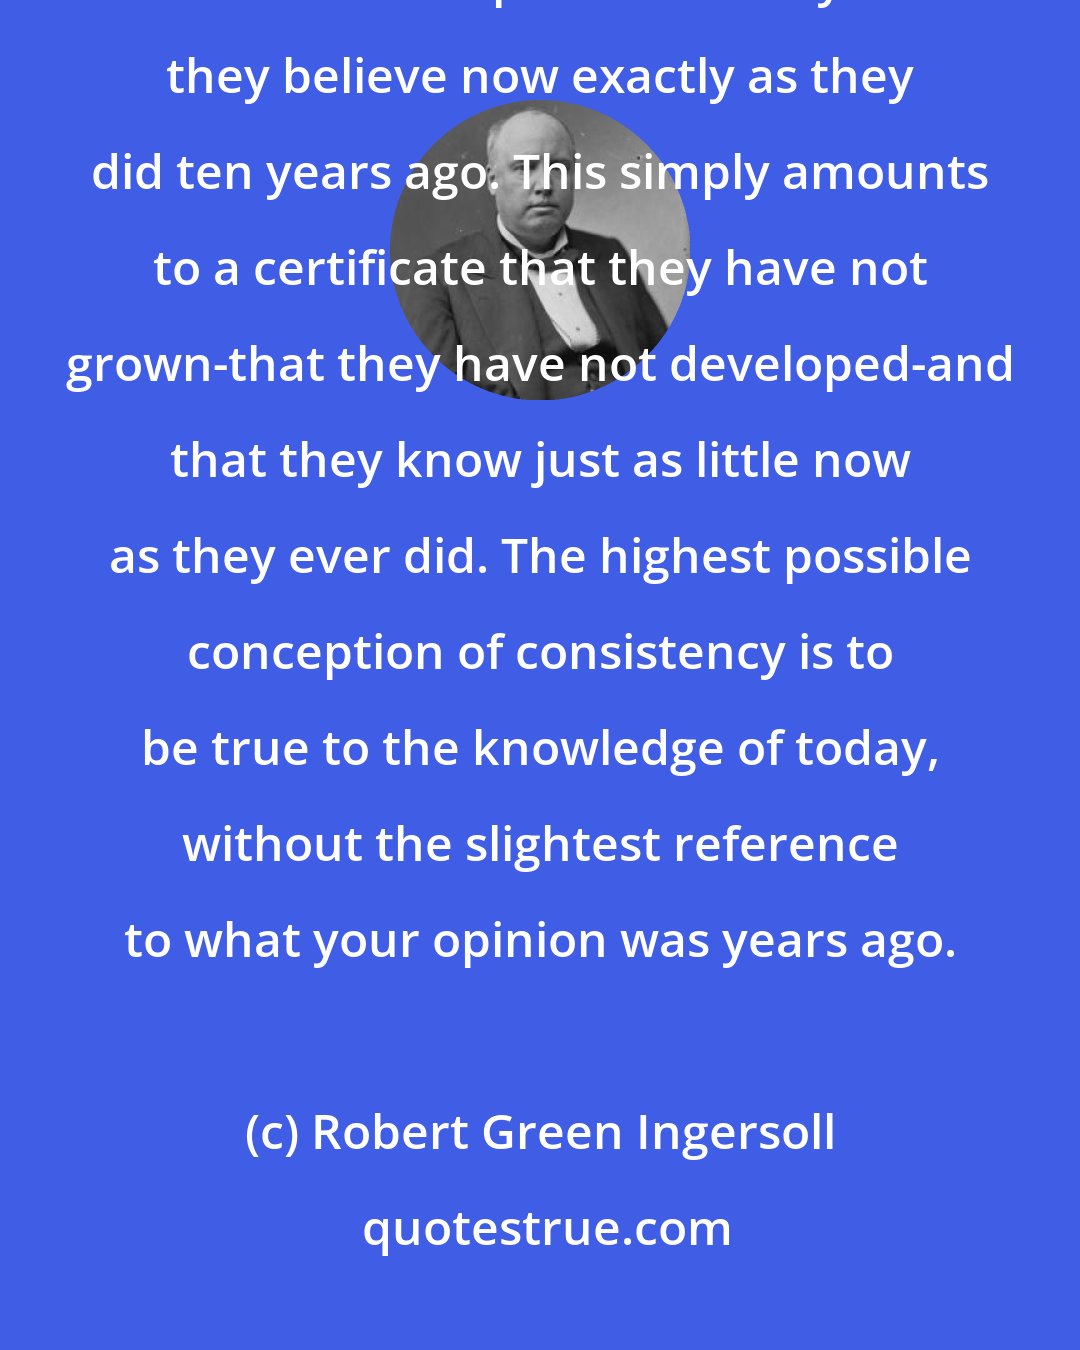 Robert Green Ingersoll: Small people delight in what they call consistency-that is, it gives them immense pleasure to say that they believe now exactly as they did ten years ago. This simply amounts to a certificate that they have not grown-that they have not developed-and that they know just as little now as they ever did. The highest possible conception of consistency is to be true to the knowledge of today, without the slightest reference to what your opinion was years ago.